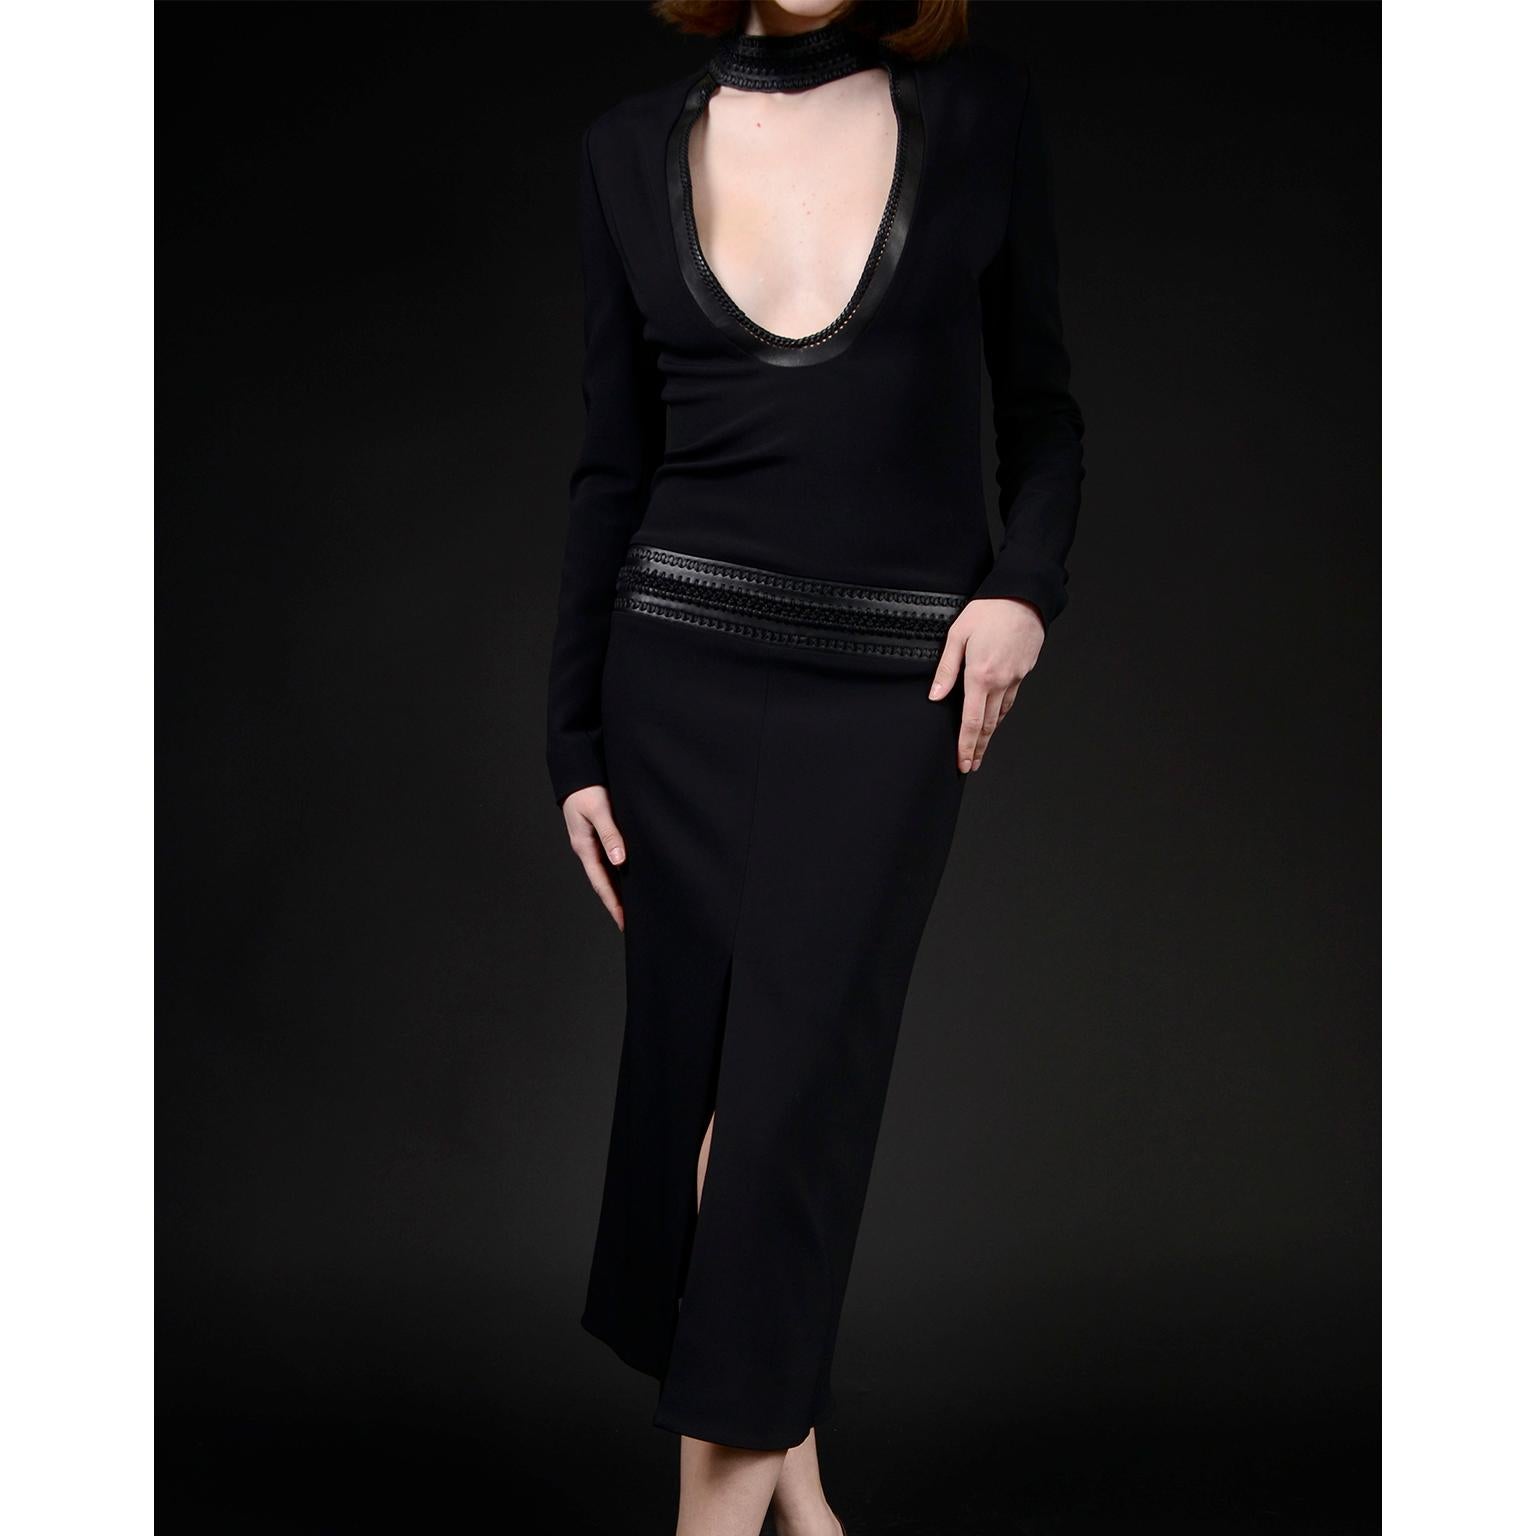 Women's or Men's Tom Ford Leather Collar Bodycon Black Low Cut Statement Runway Dress